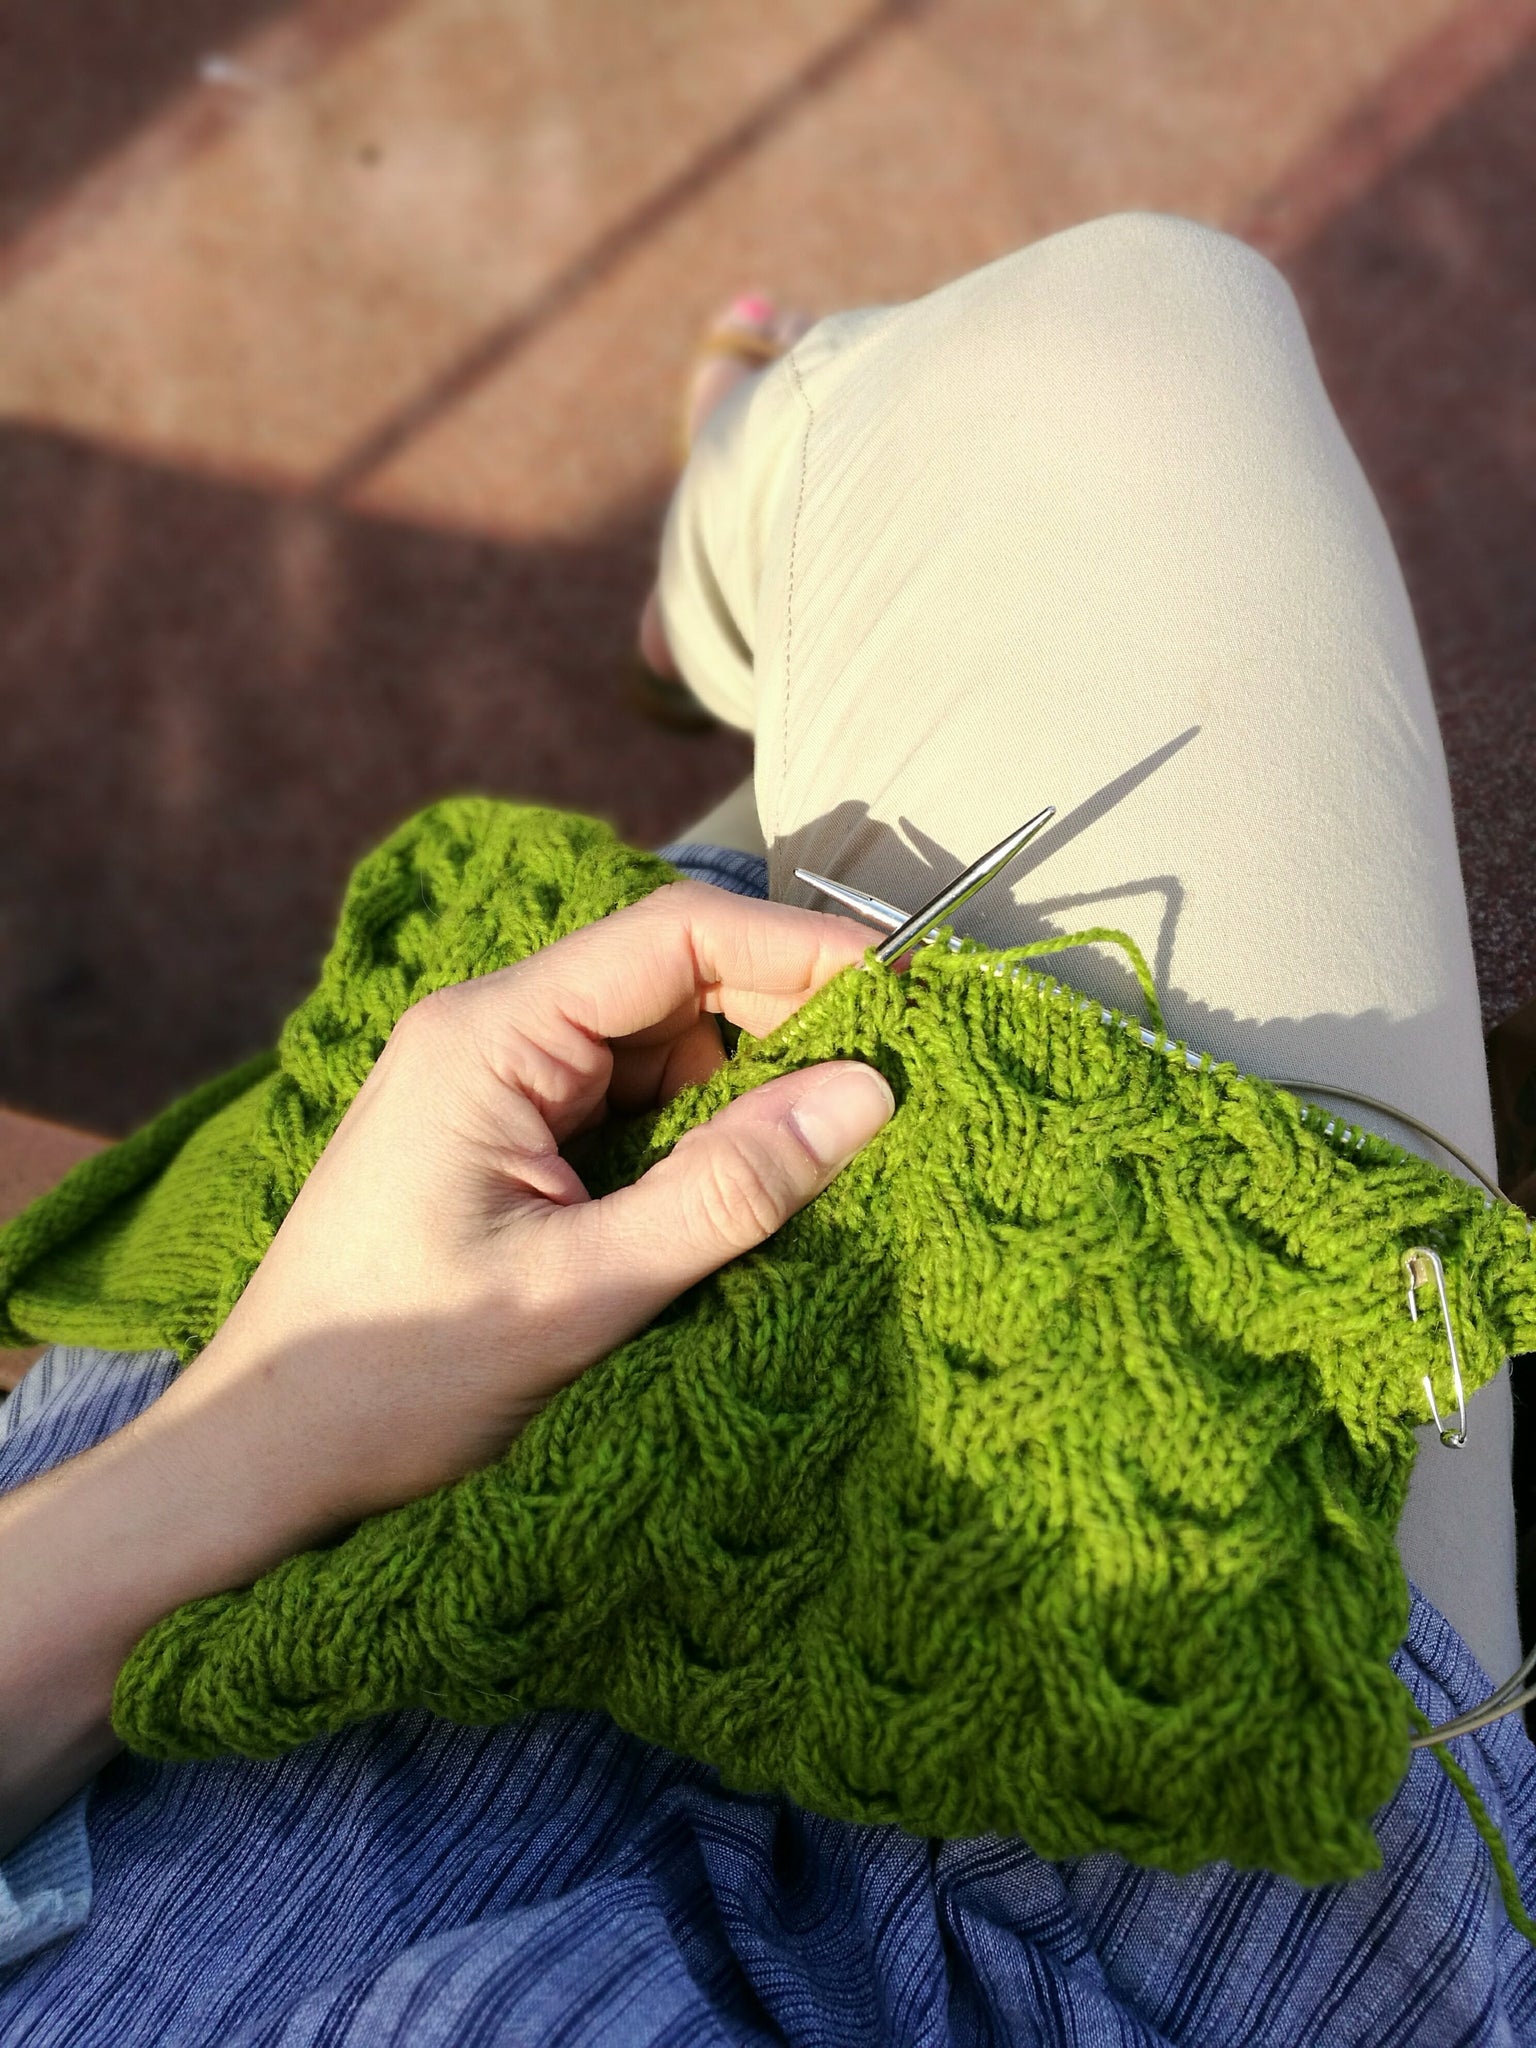 Image of knitting shot from above, in warm sunshine. A white skinned hand holds the needle, the project is a cabled cowl in green yarn.